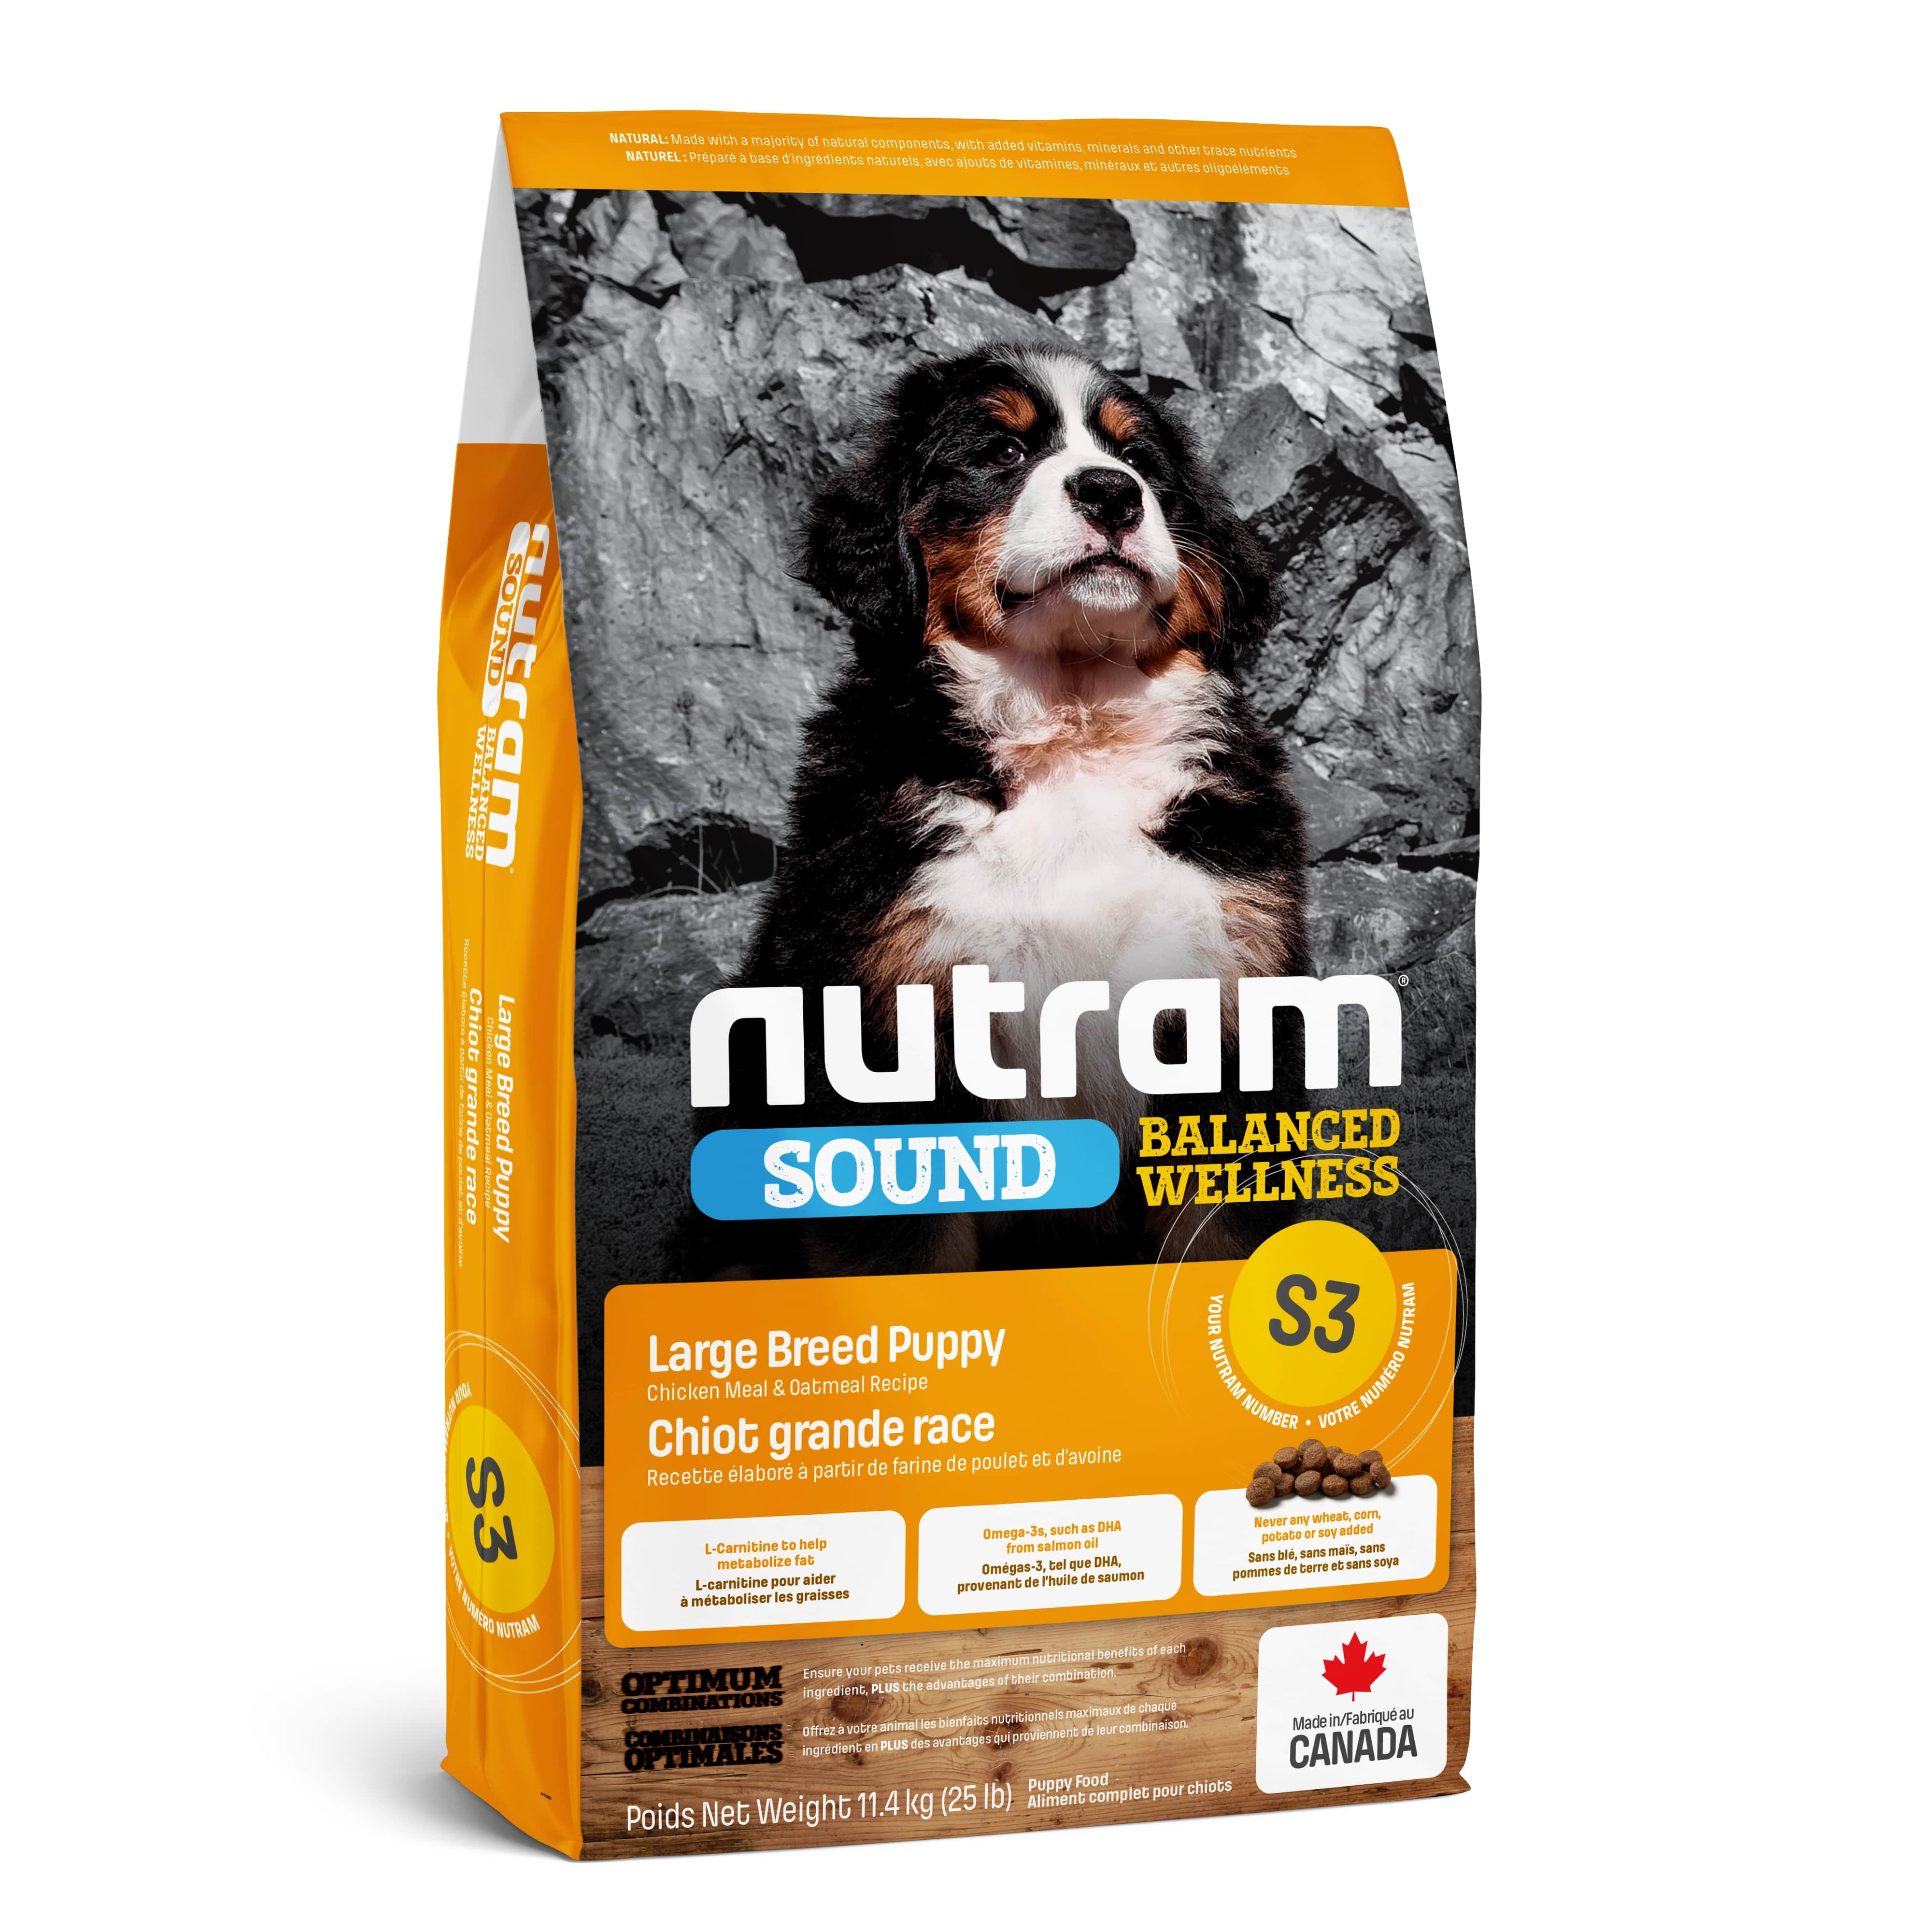 S3 Nutram Sound Balanced Wellness® Natural Large Breed Puppy Food